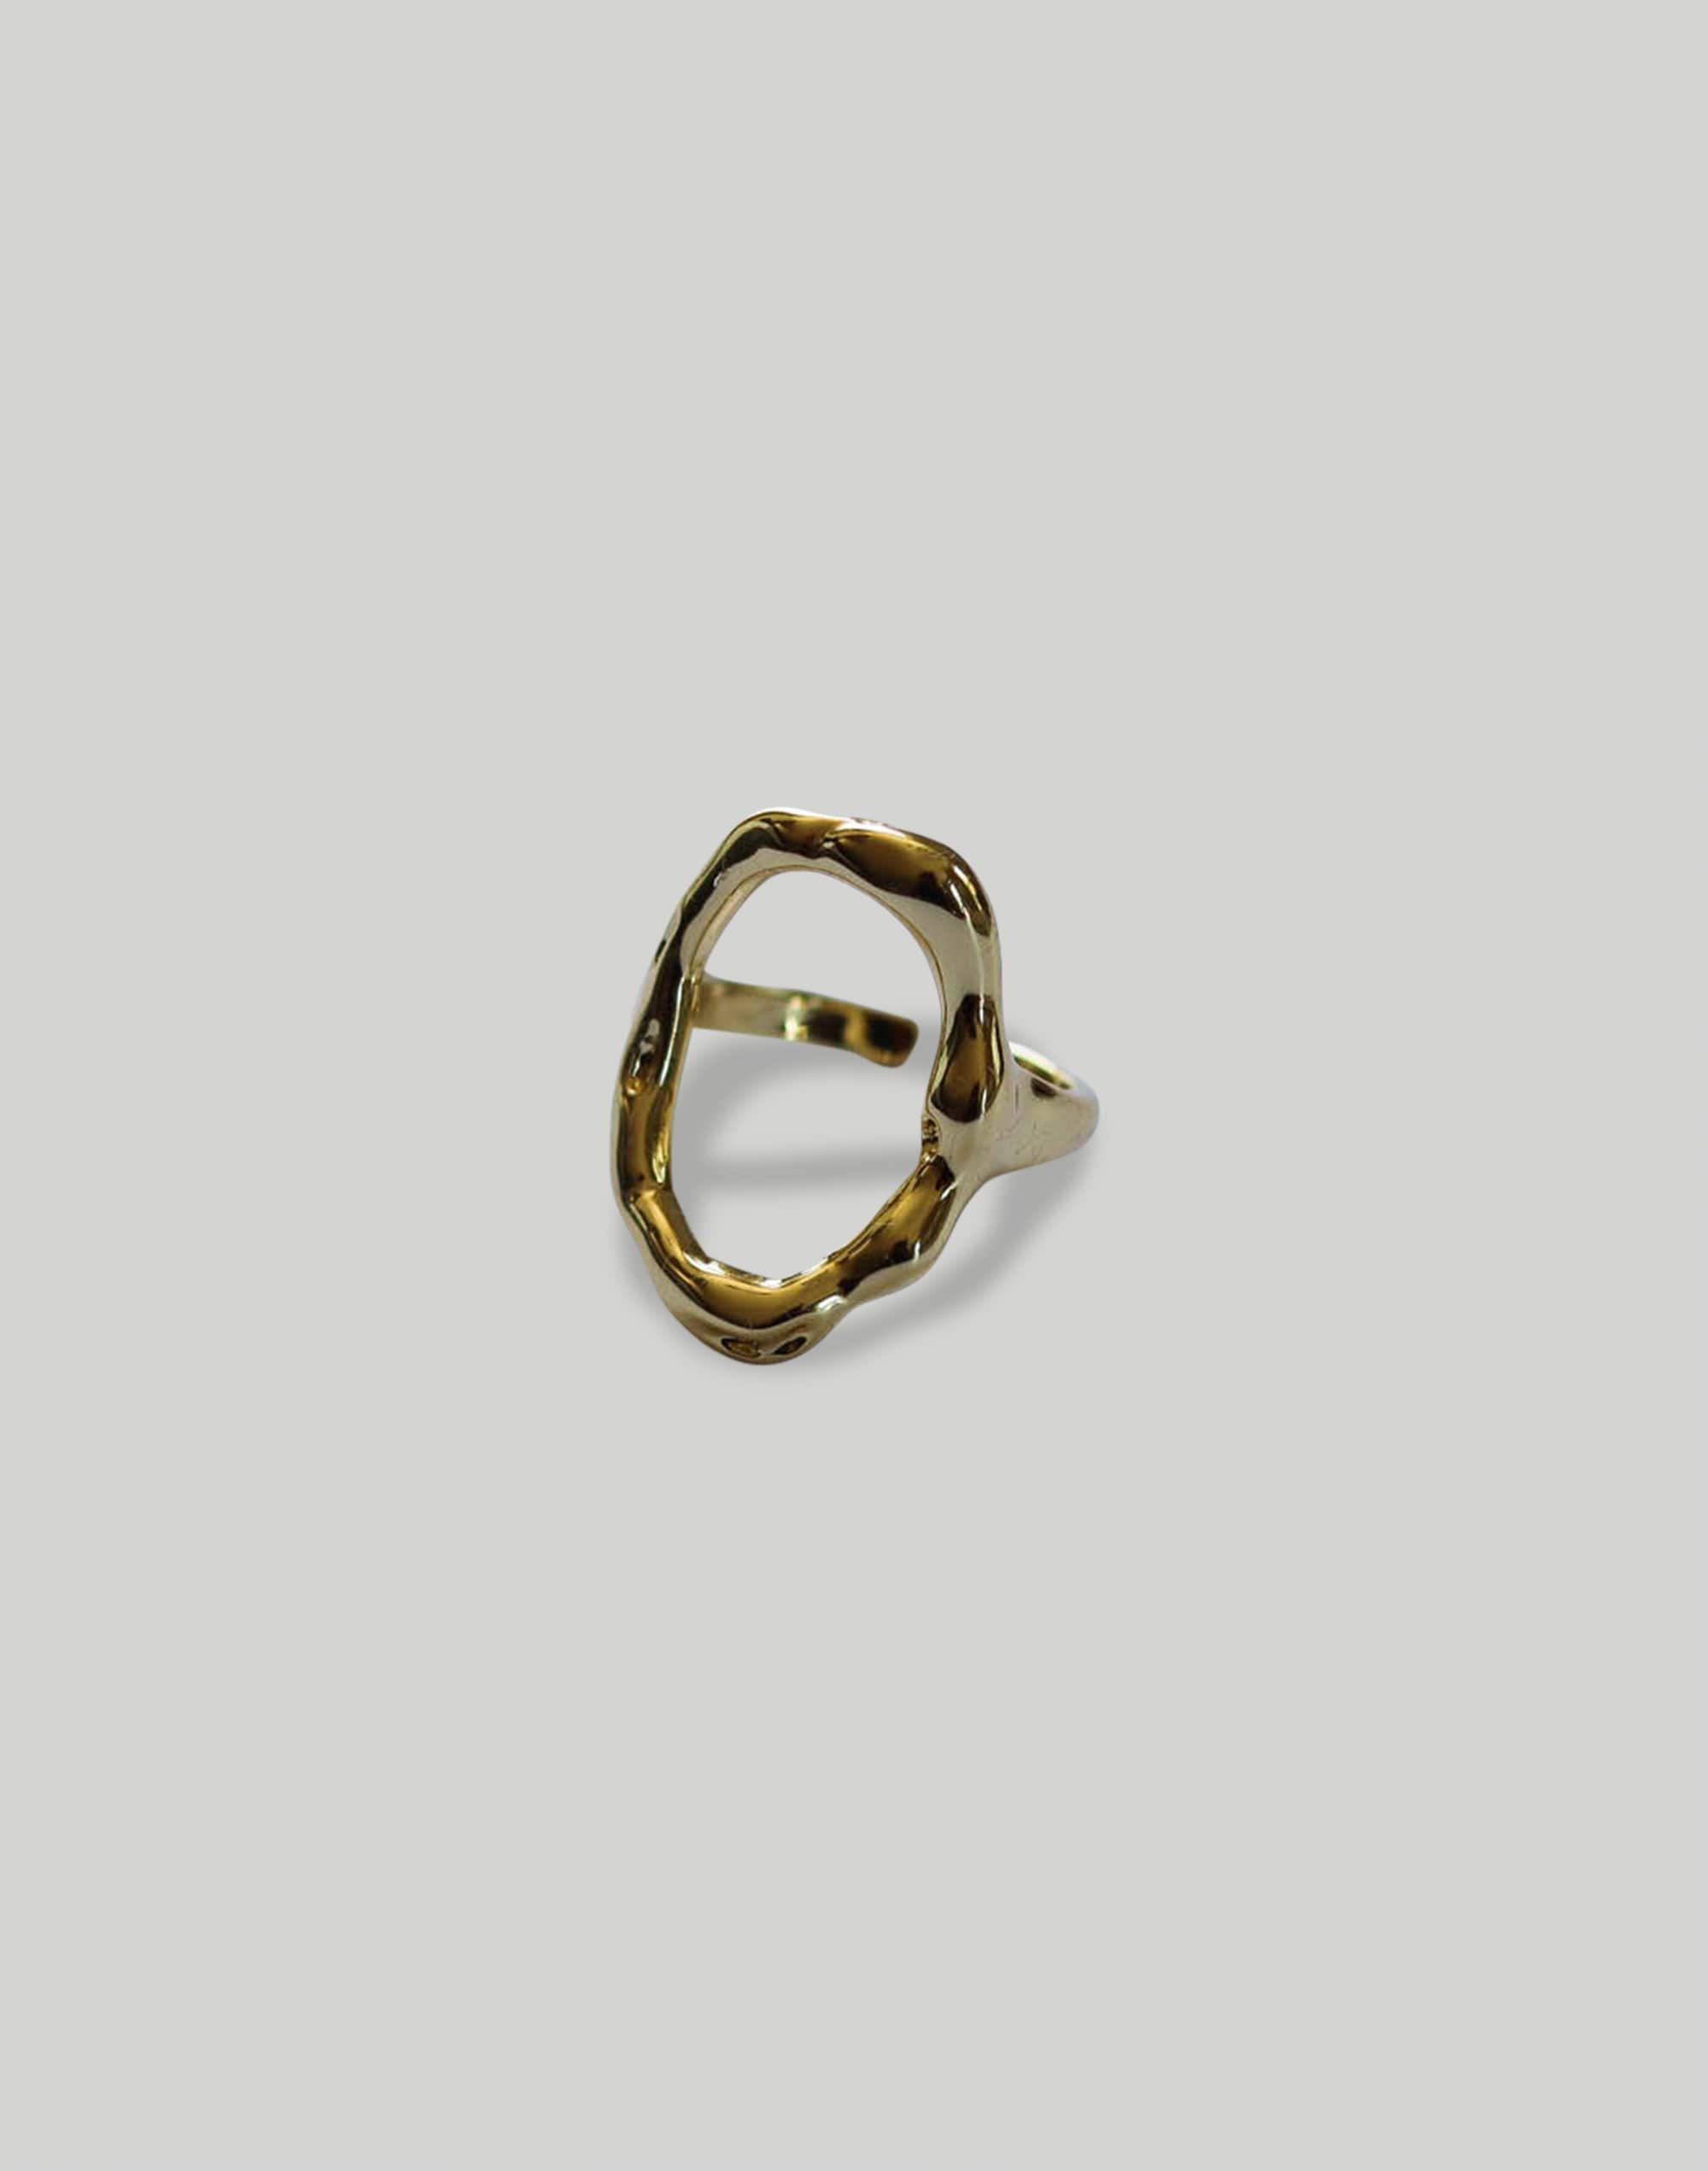 Abcrete & Co. The Adjustable Hammered Oval Ring